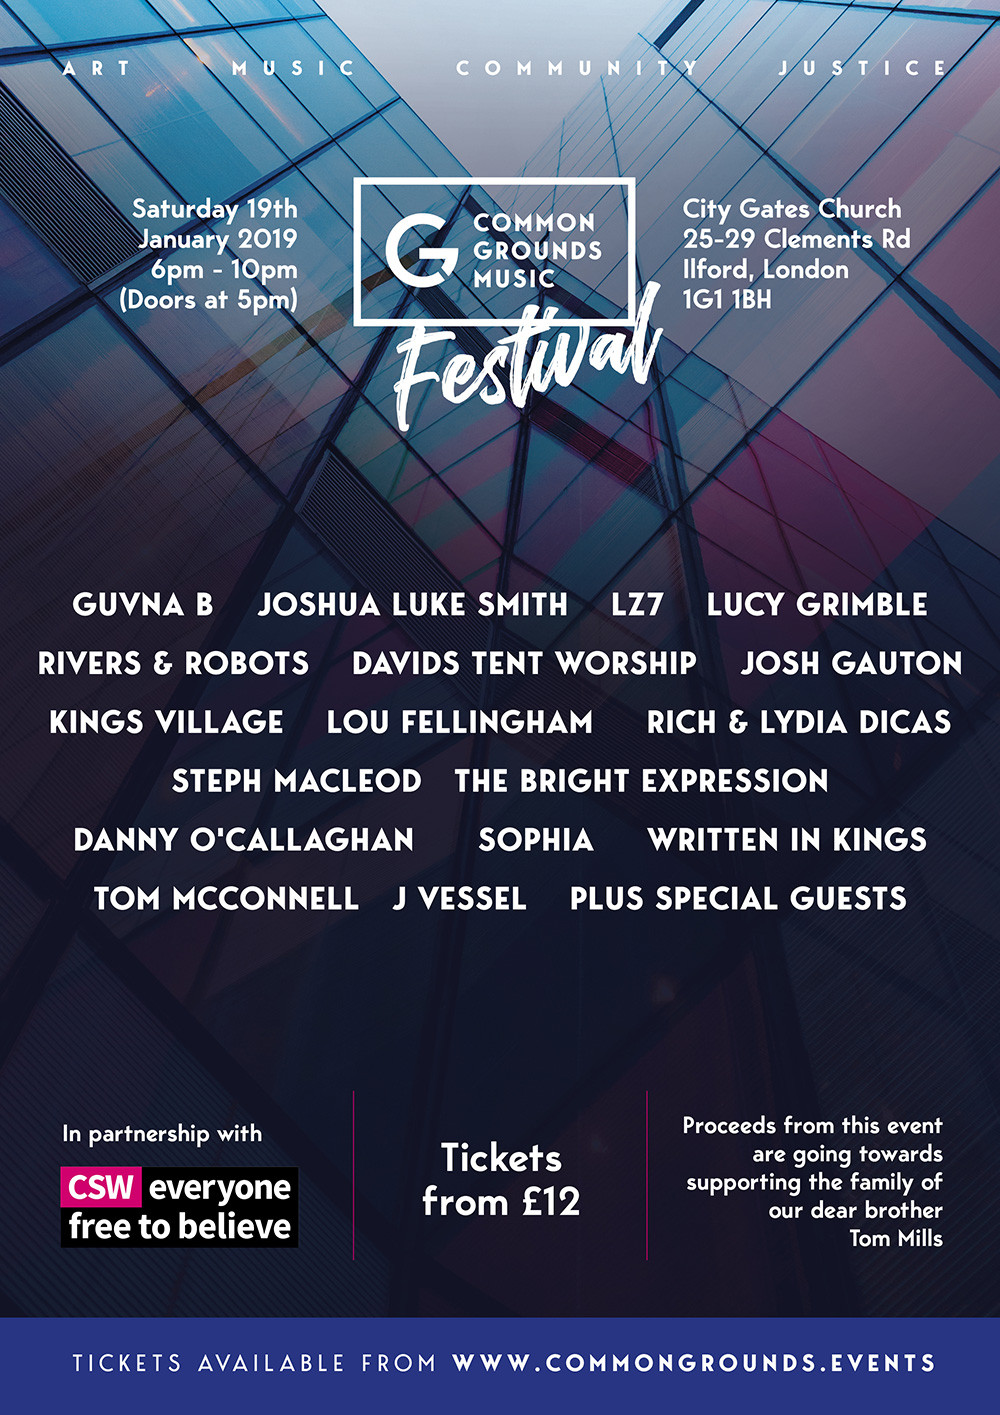 Common Grounds Mini UK Festival To Feature Guvna B, LZ7, Lou Fellingham, The Bright Expression, Rivers & Robots & More